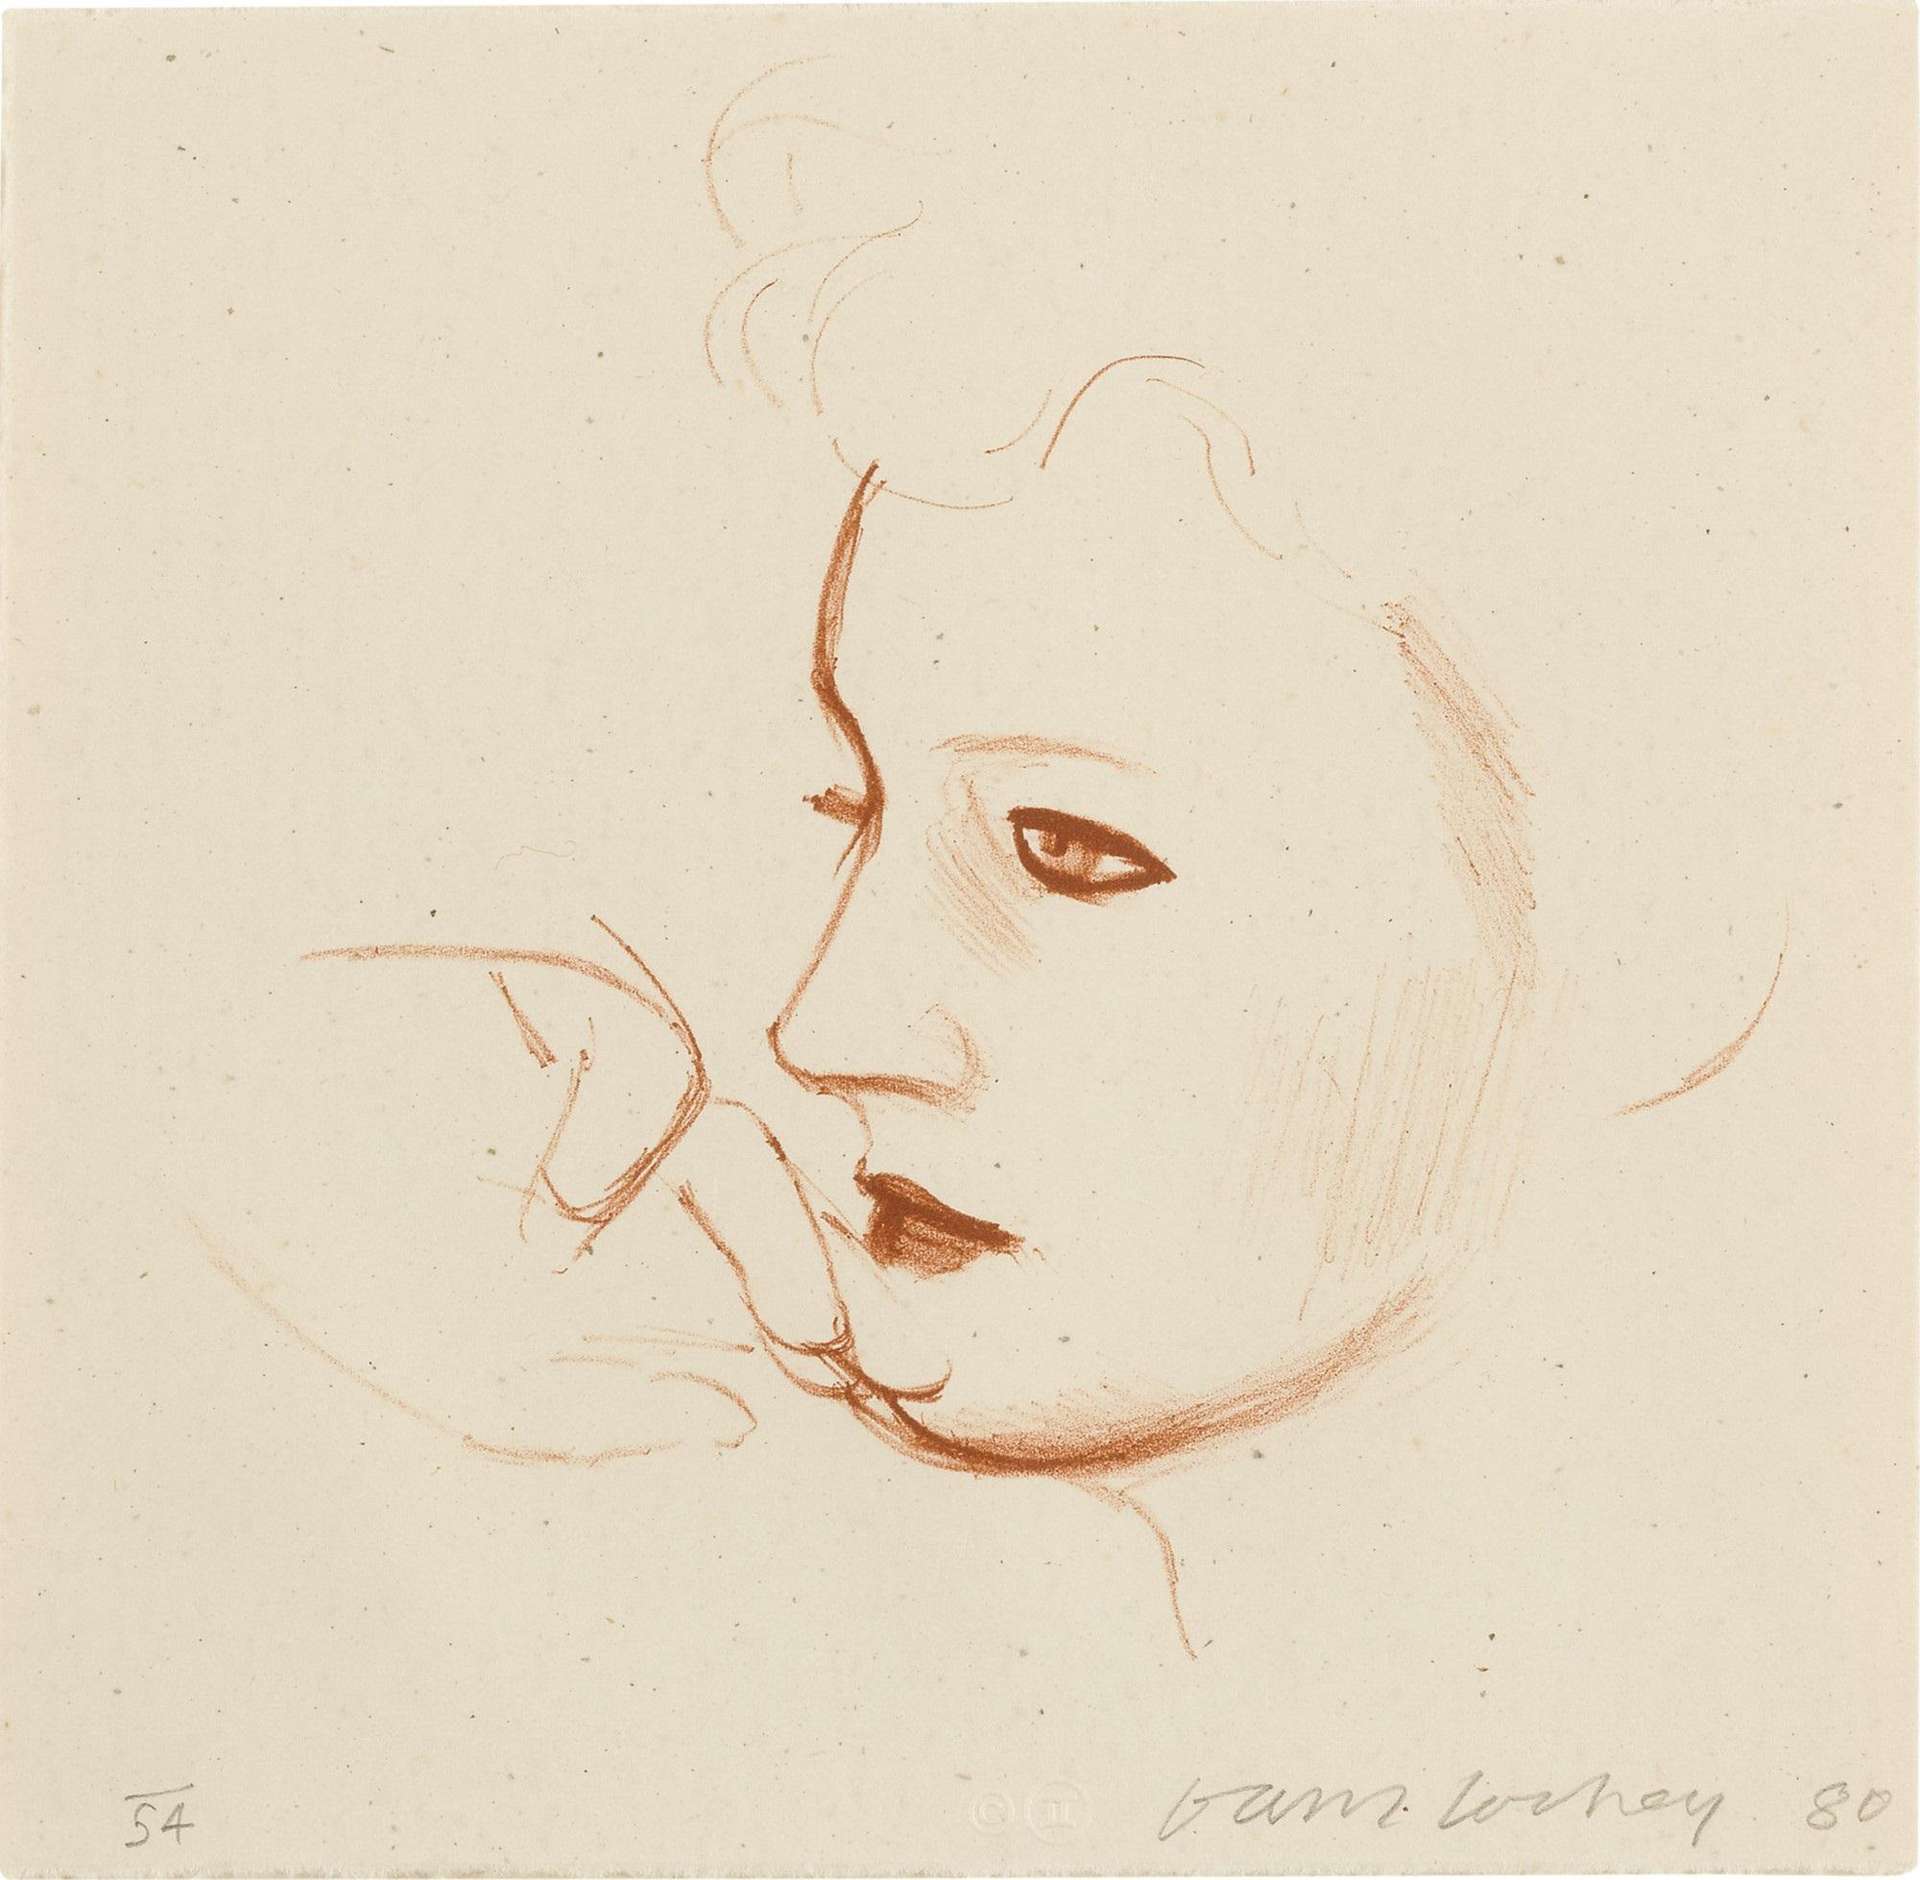 Rendered in a strikingly sparse way, Celia Birtwell’s profile occupies almost a whole right side of the print. The woman’s hand emerges indistinctly from the left corner, with two fingers gently touching the chin. Hockney’s line here is vividly fragmented, picking up and fading in an irregular manner. The portrayal of eyes, nose, and lips contrasts with the elements outside the central area of the print as this is where the contour becomes thinner or almost indistinct.